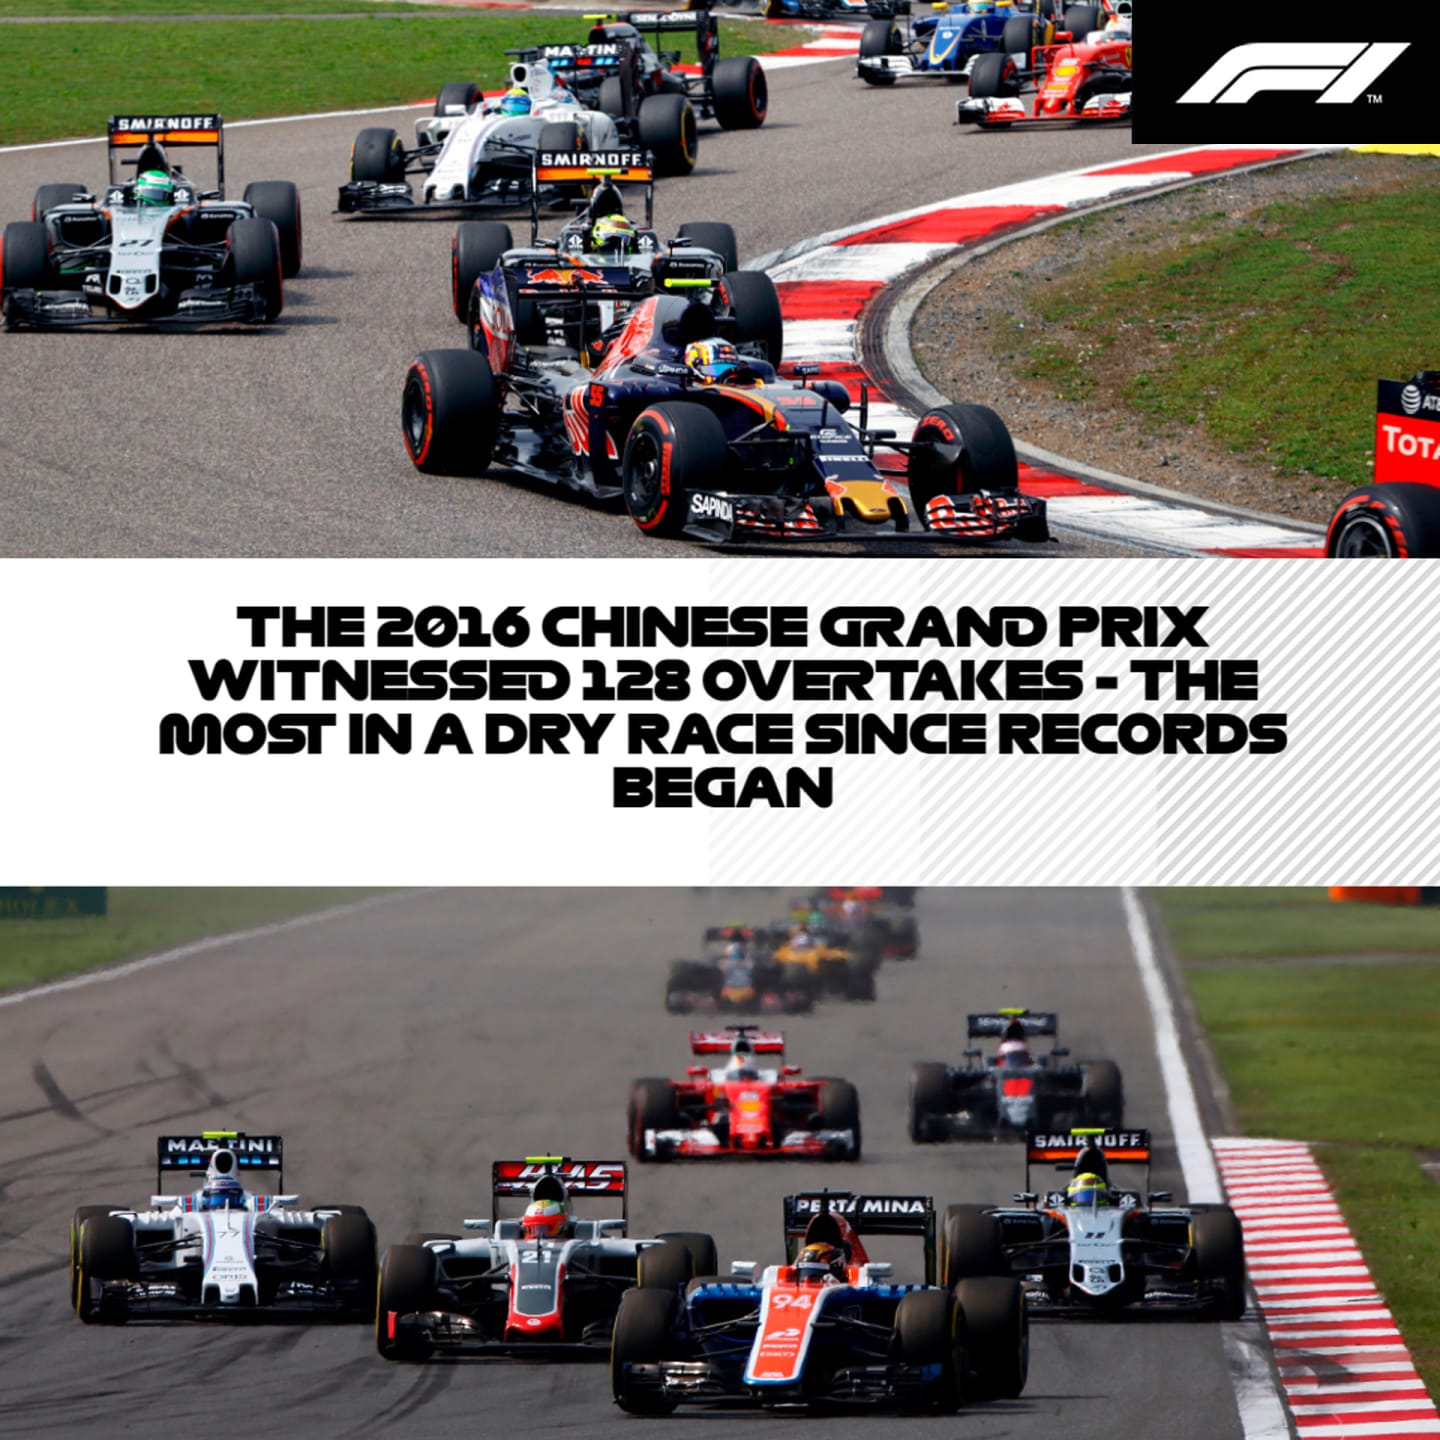 Overtakes